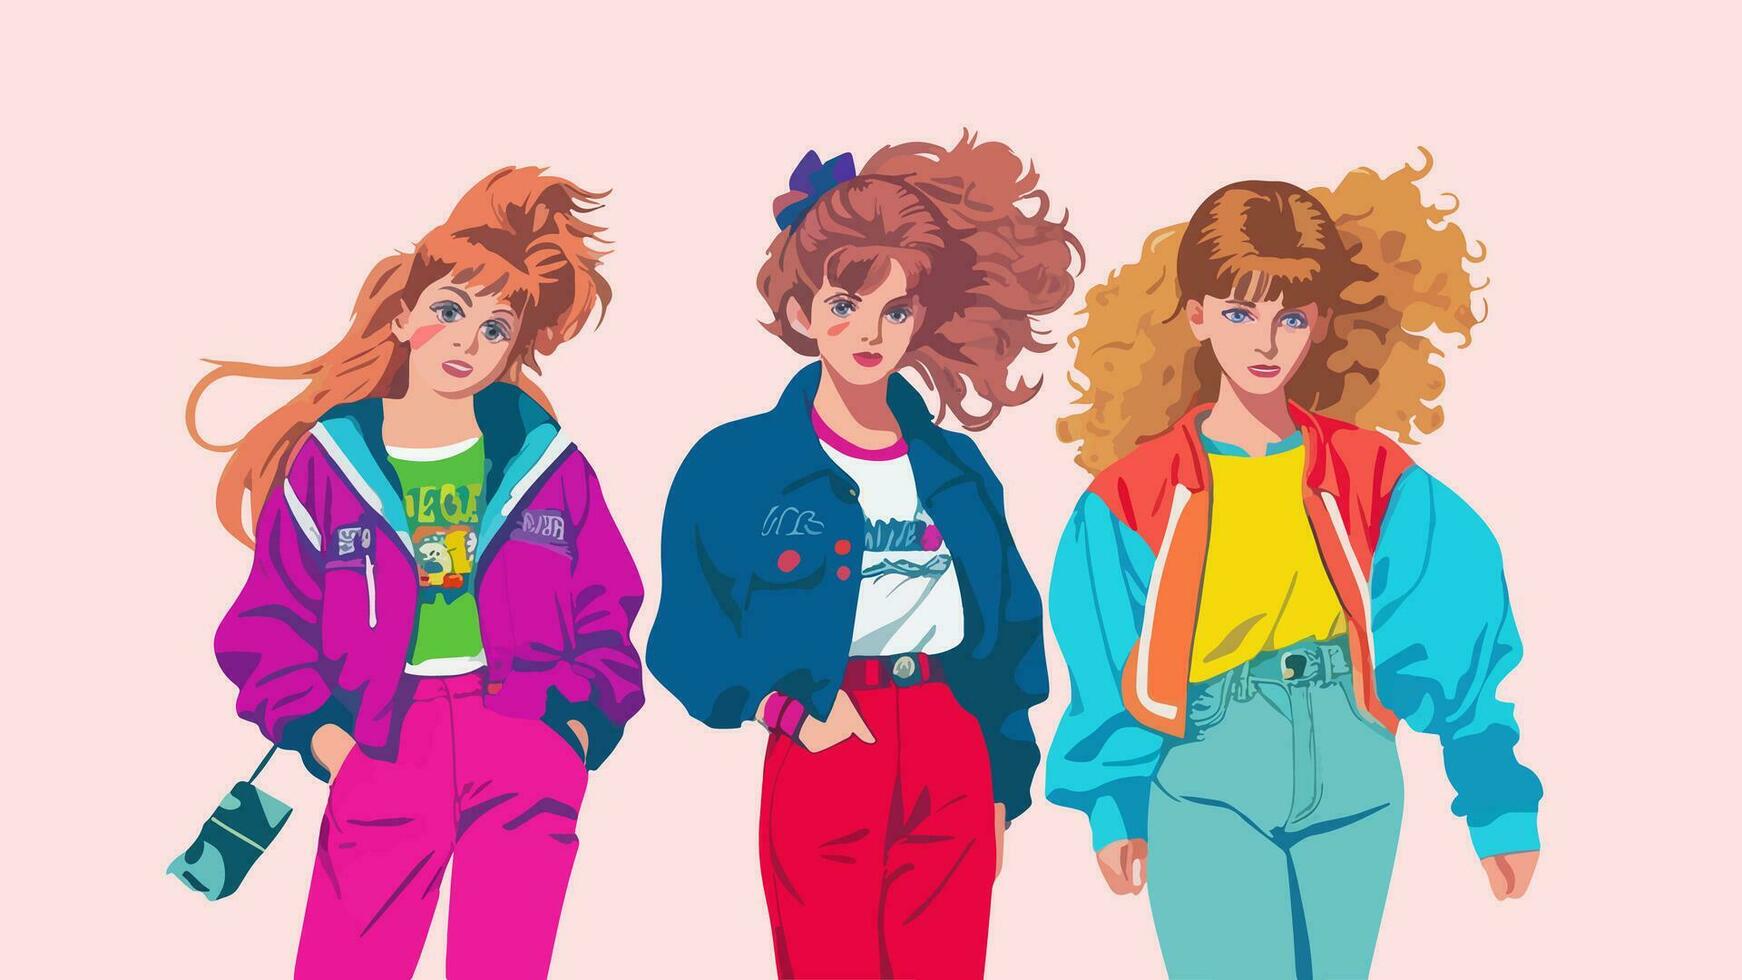 Three girls friends from the 90s. Set of illustrations. Collection of characters in trendy retro and memphis style. Fashionable, stylish girls in bright multi-colored clothes. Vector